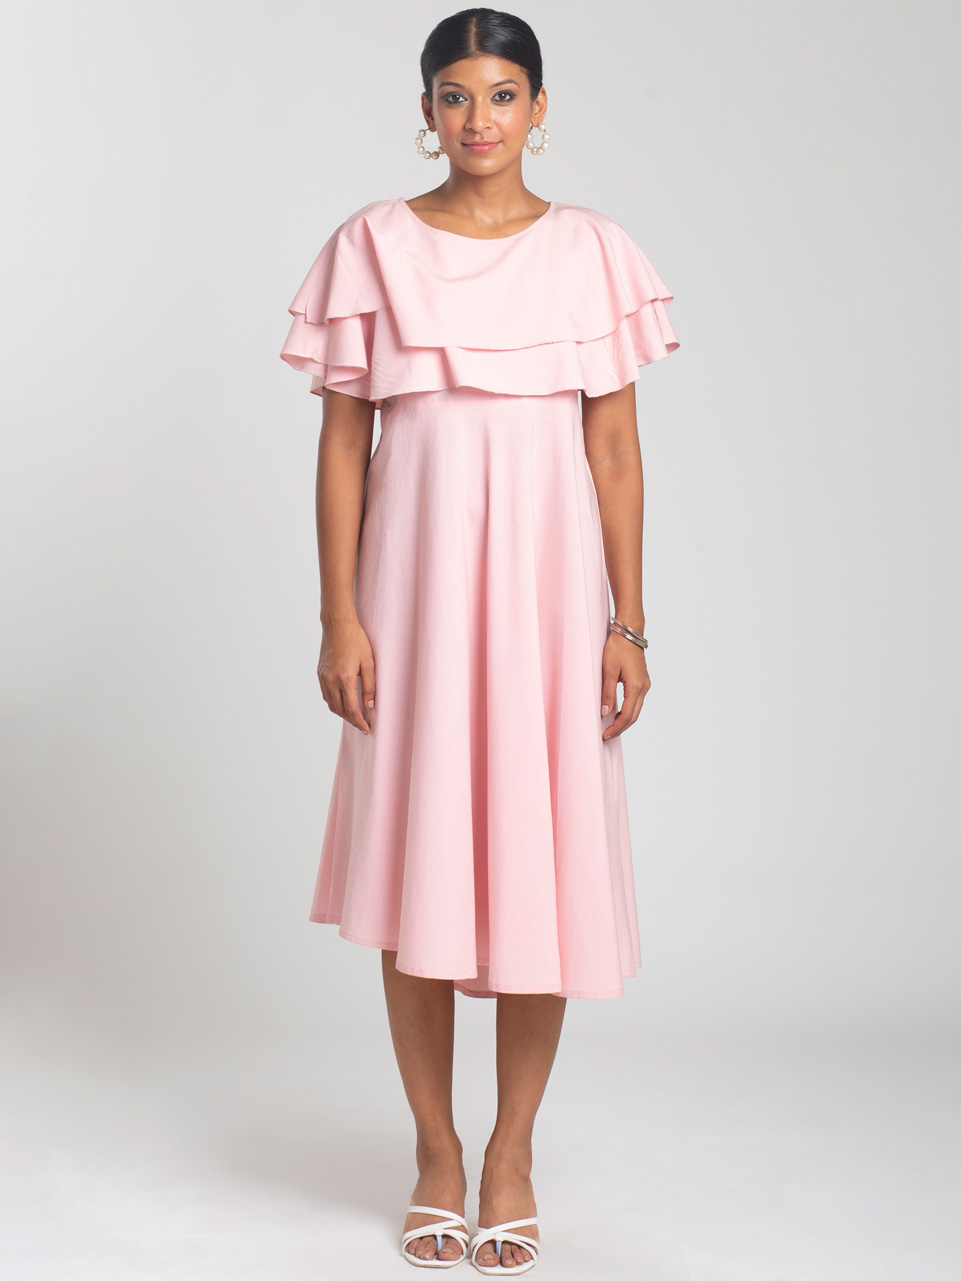 BABY PINK PLAIN SOLID FLARE DRESS